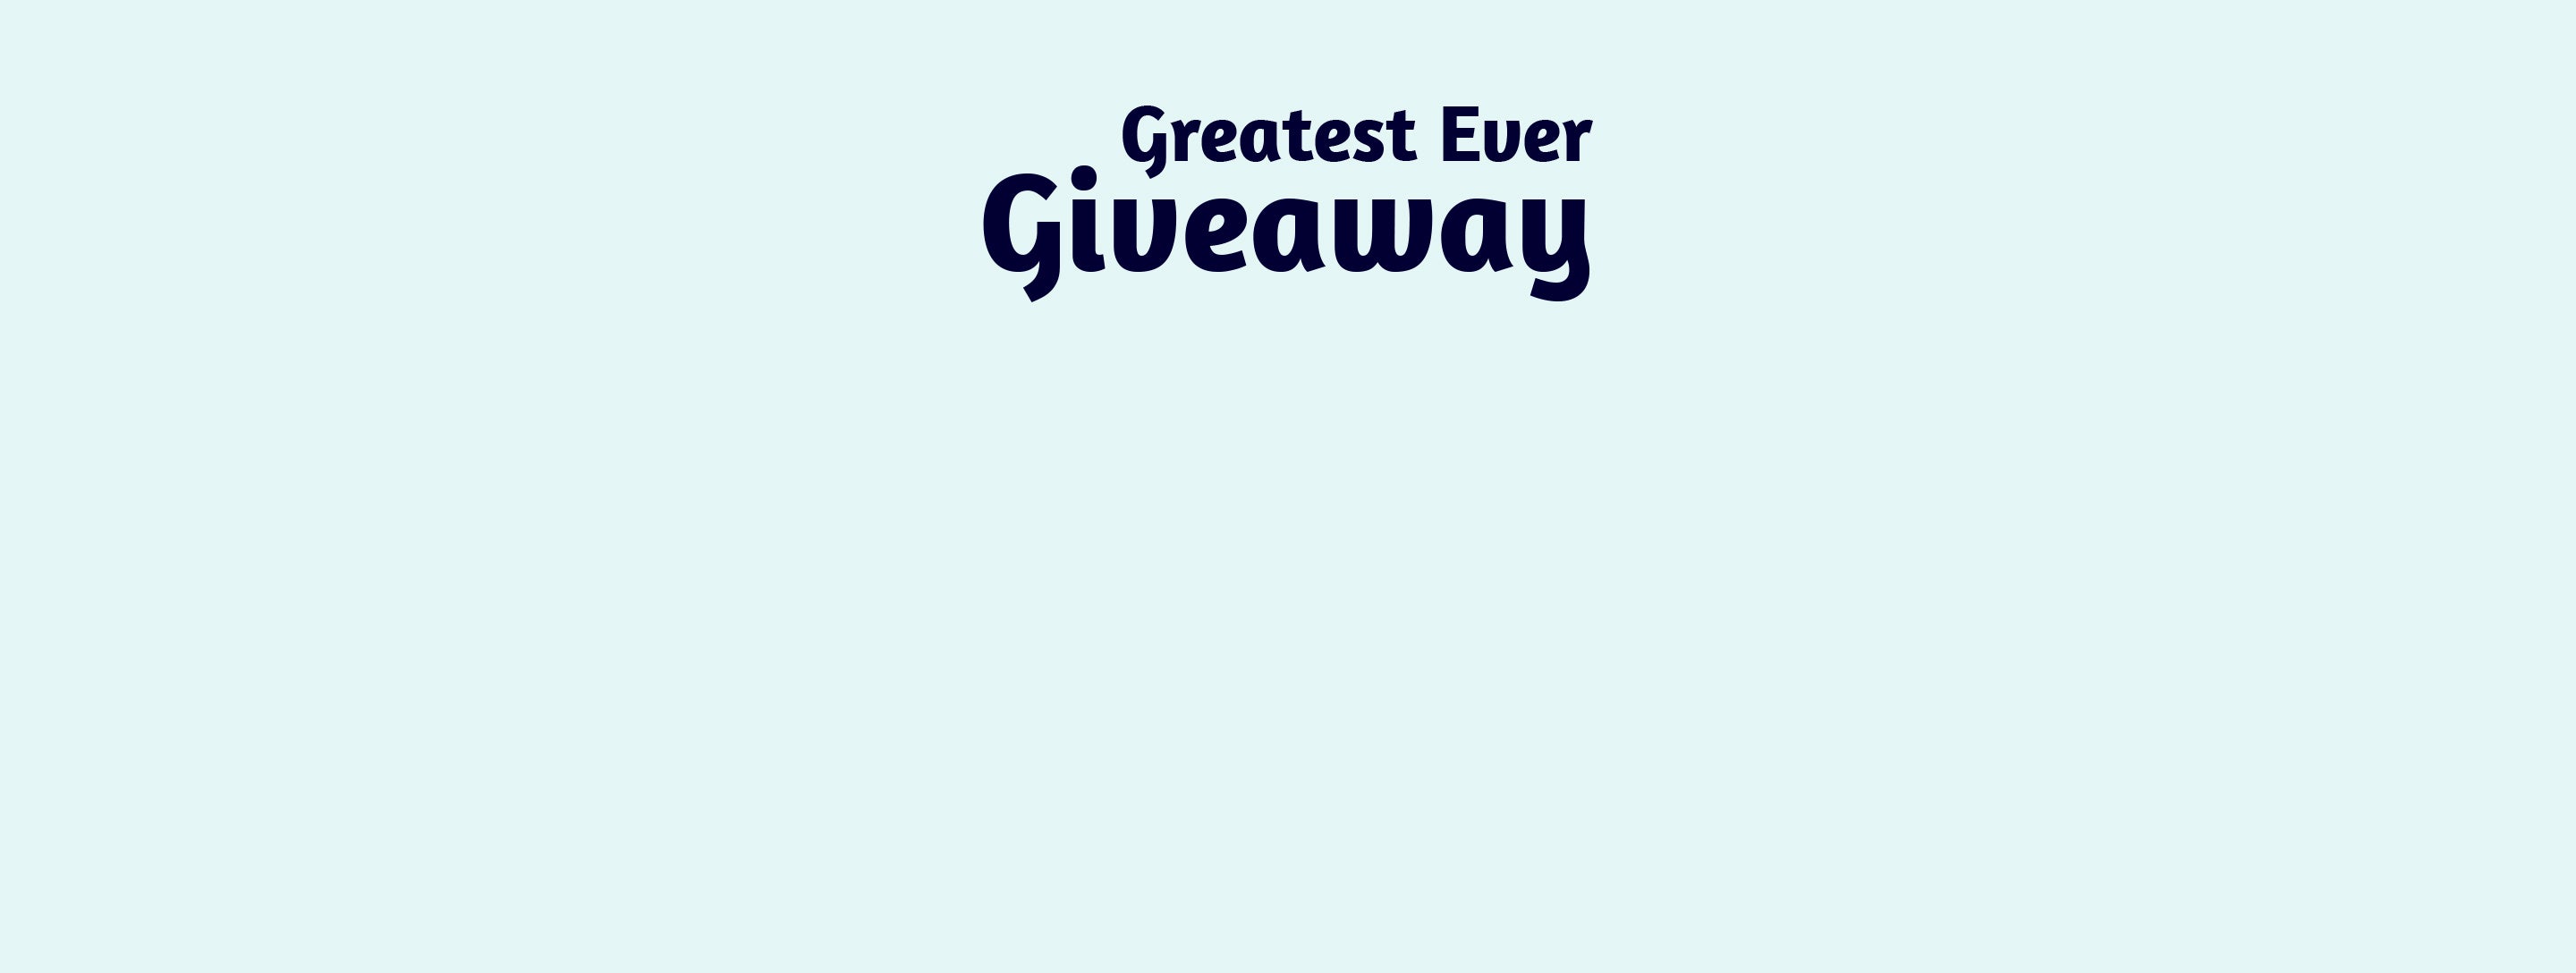 Our greatest ever giveaway is closed!